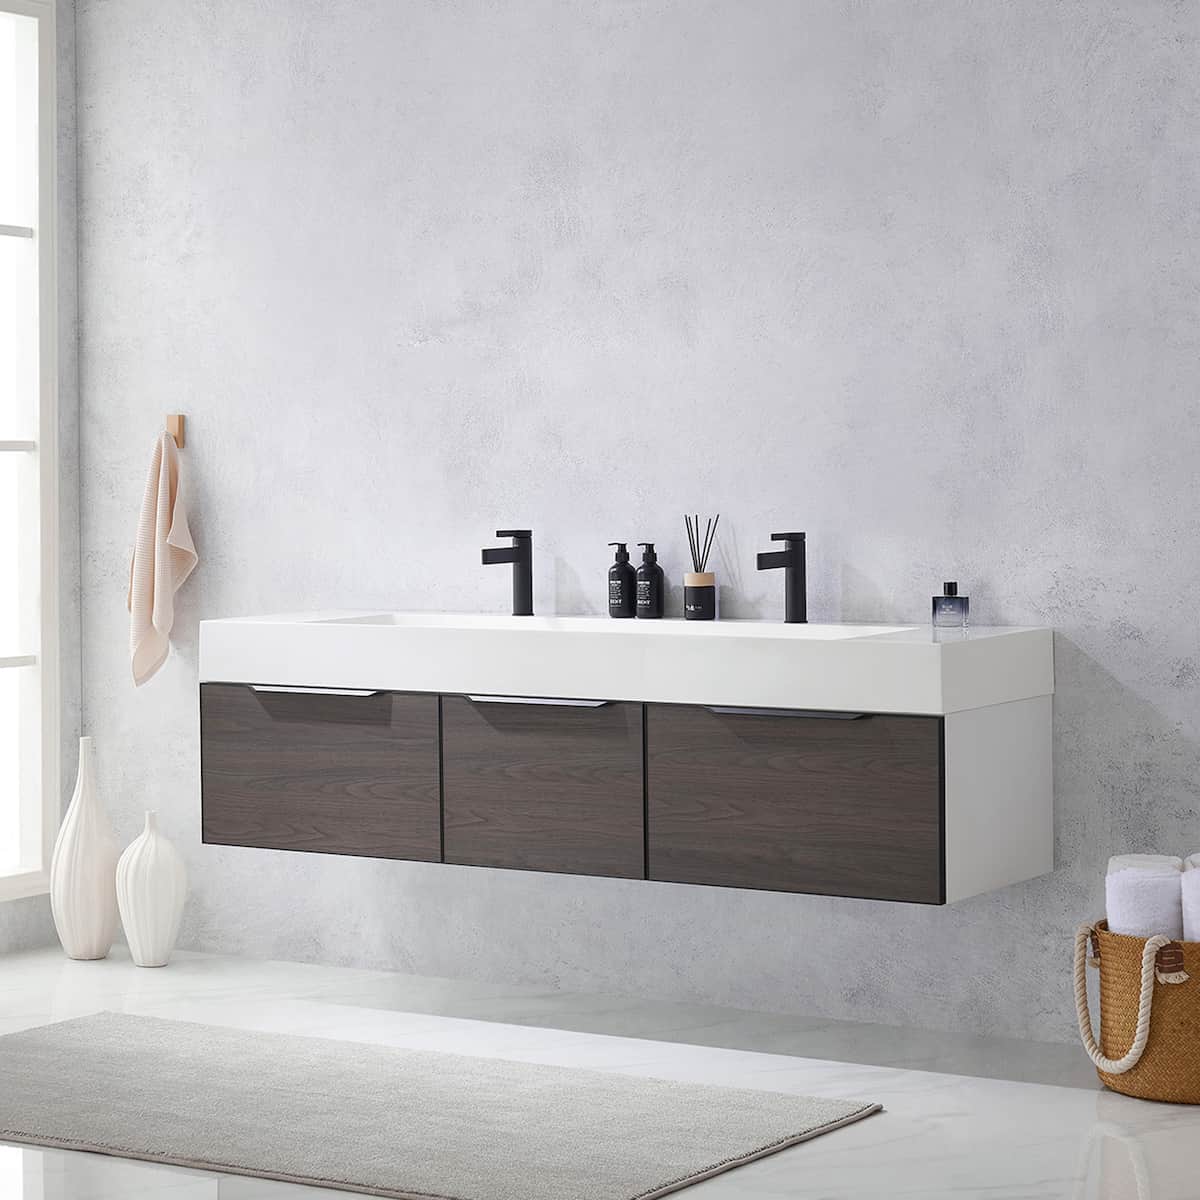 Vinnova Vegadeo 72 Inch Wall Mount Double Sink Bath Vanity in Suleiman Oak Finish with White One-Piece Composite Stone Sink Top Without Mirror Side 703472-SO-WH-NM